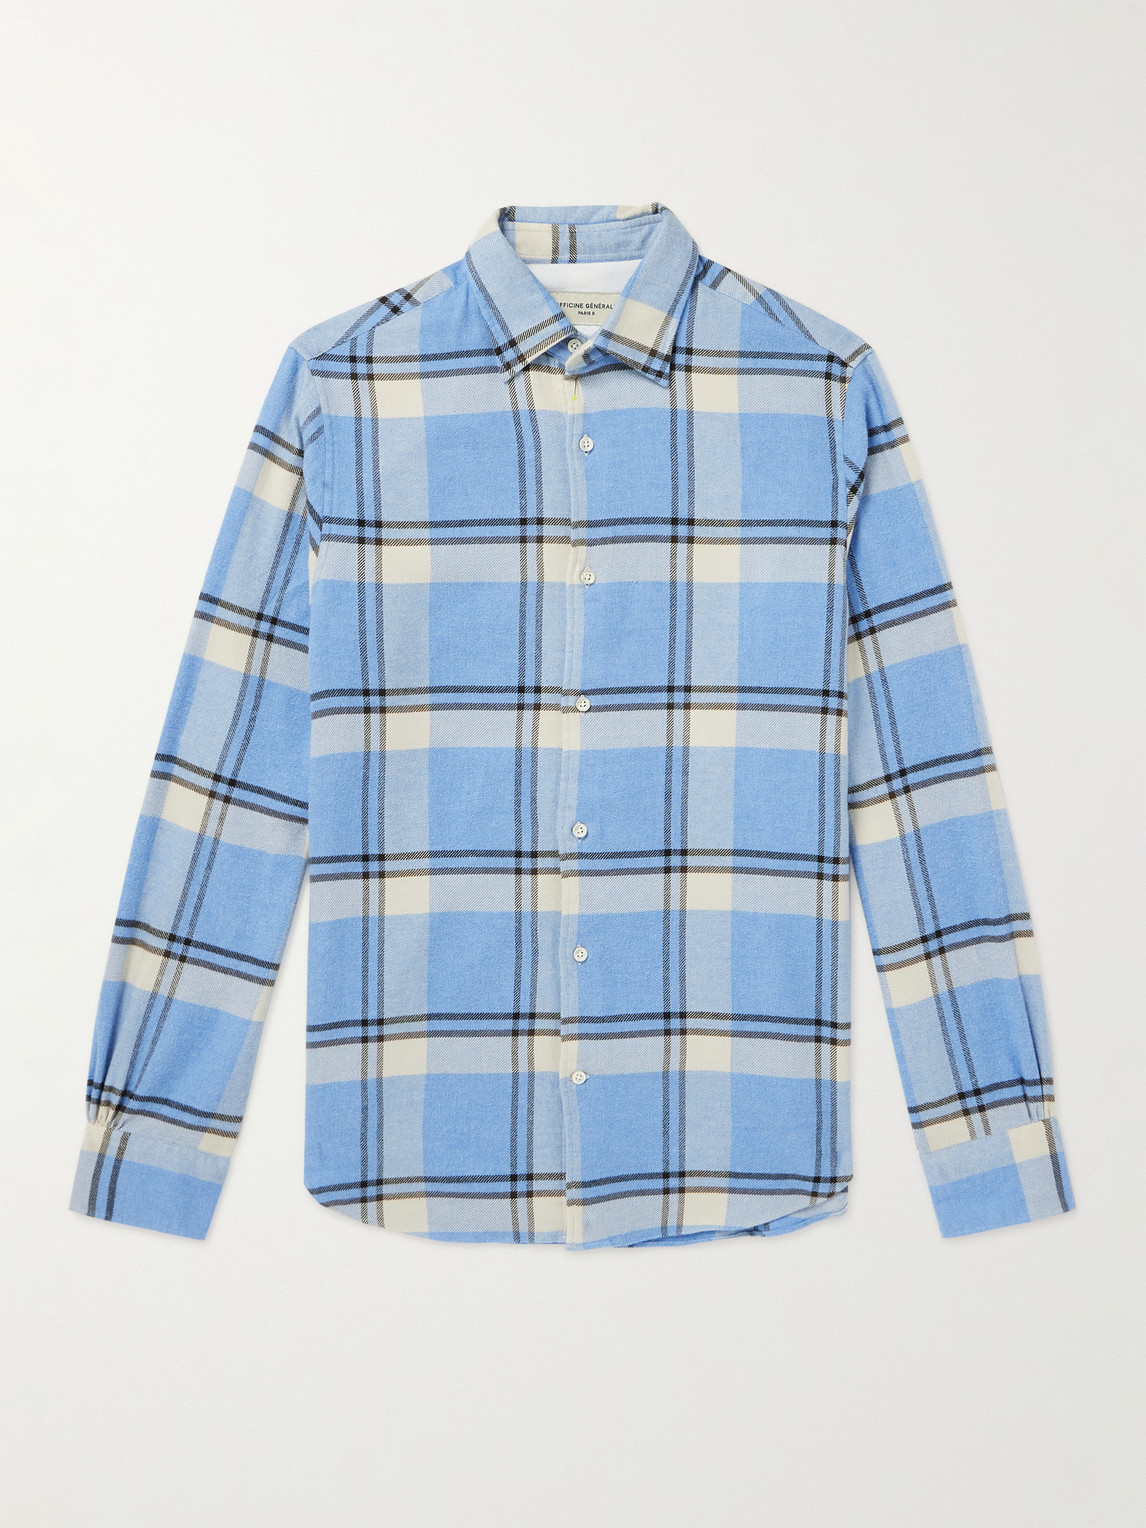 Officine Generale Giacomo Checked Cotton Shirt In Blue